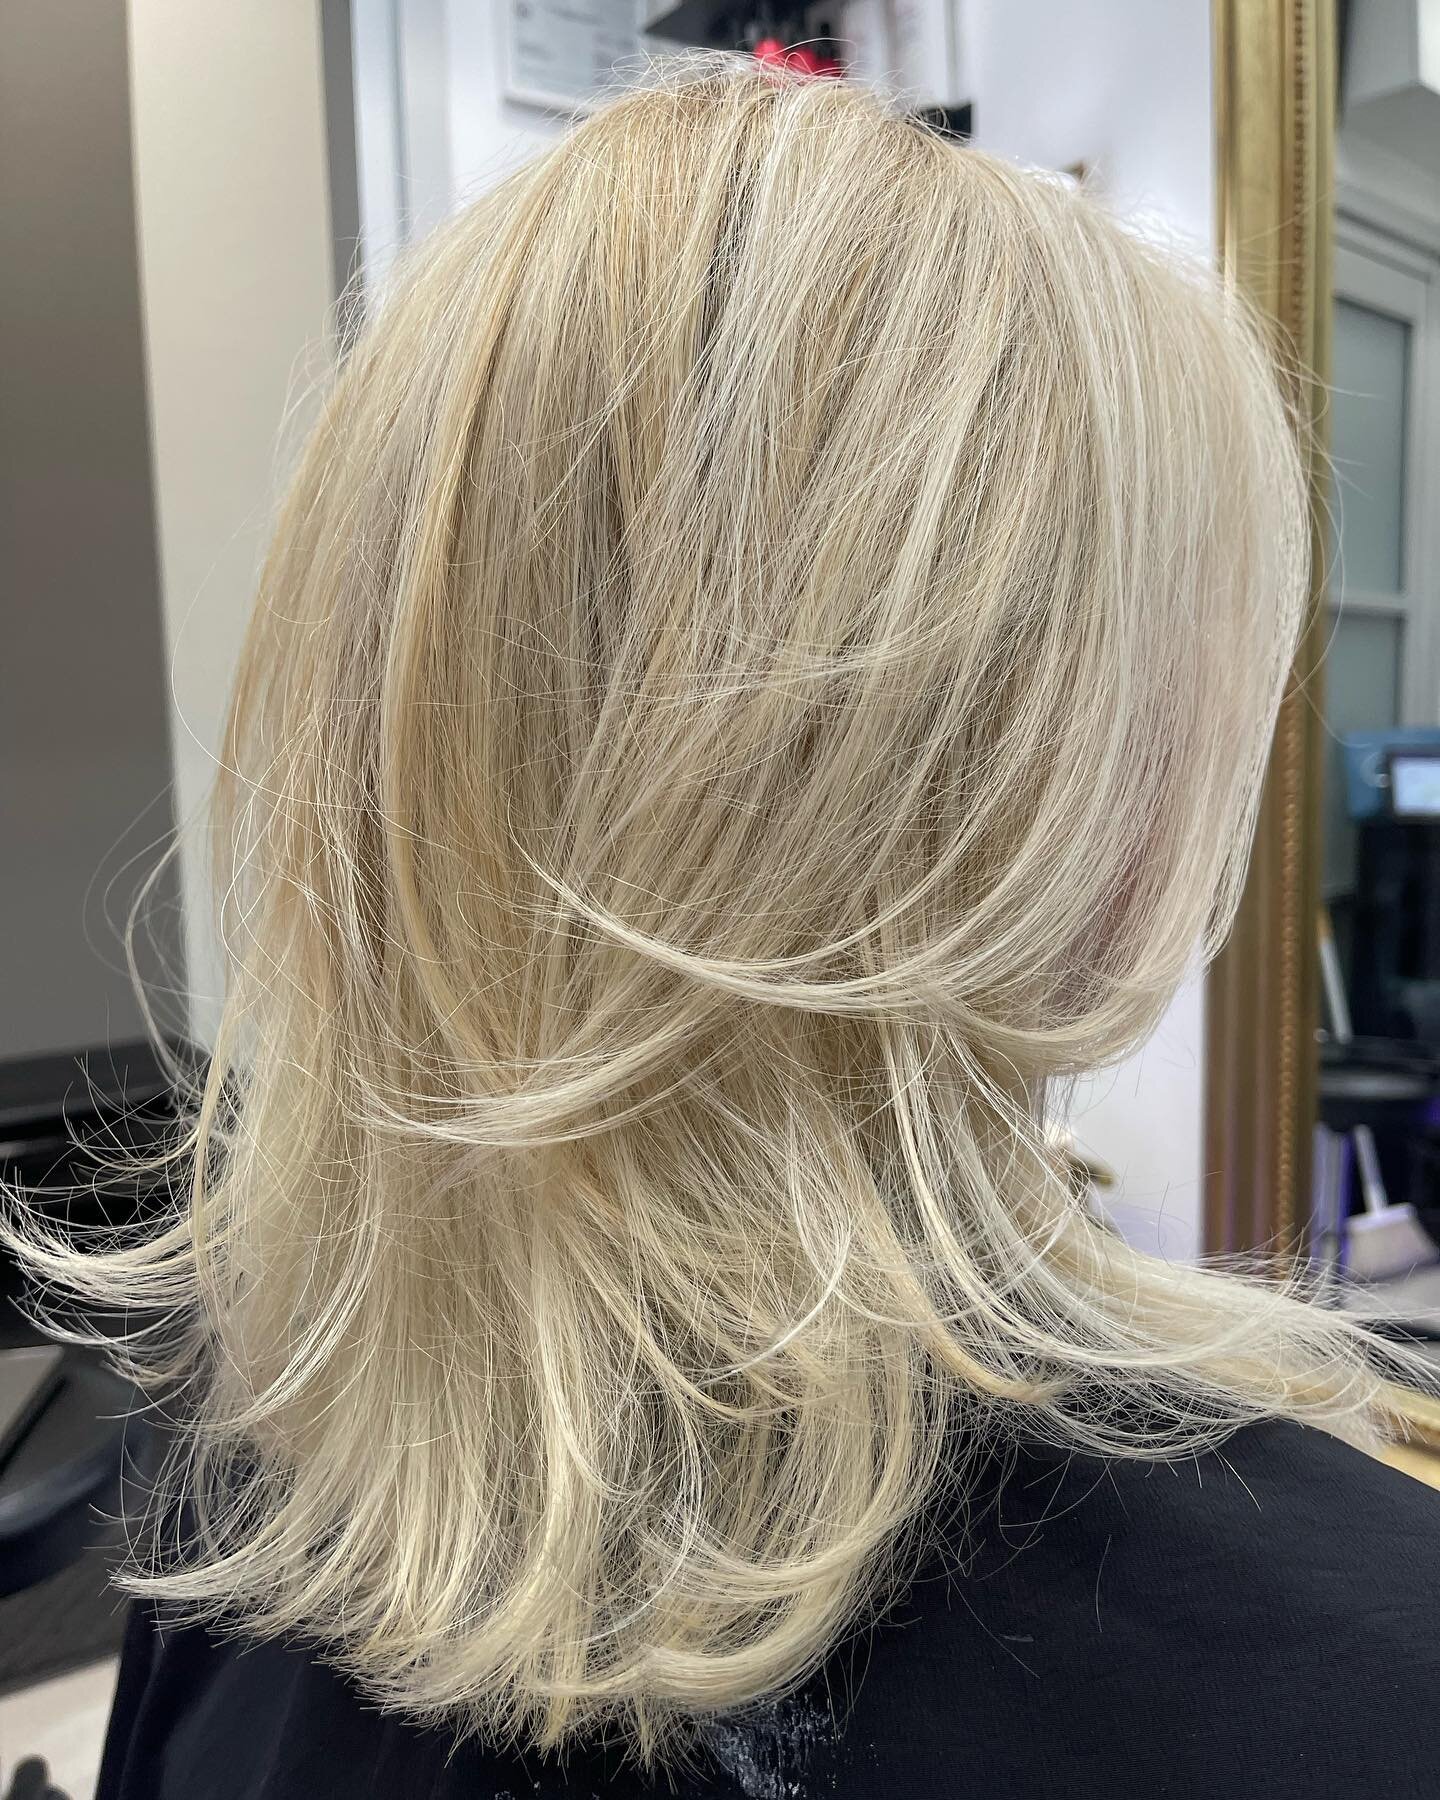 5 HOURS to see her before swipe left ⬅️. From doing her base grey coverage toning her mid  shaft and ends. Full head of balayage tone all over and cut. The out come was beautiful with the integrity of her hair staying in tact with the use of K18!!!